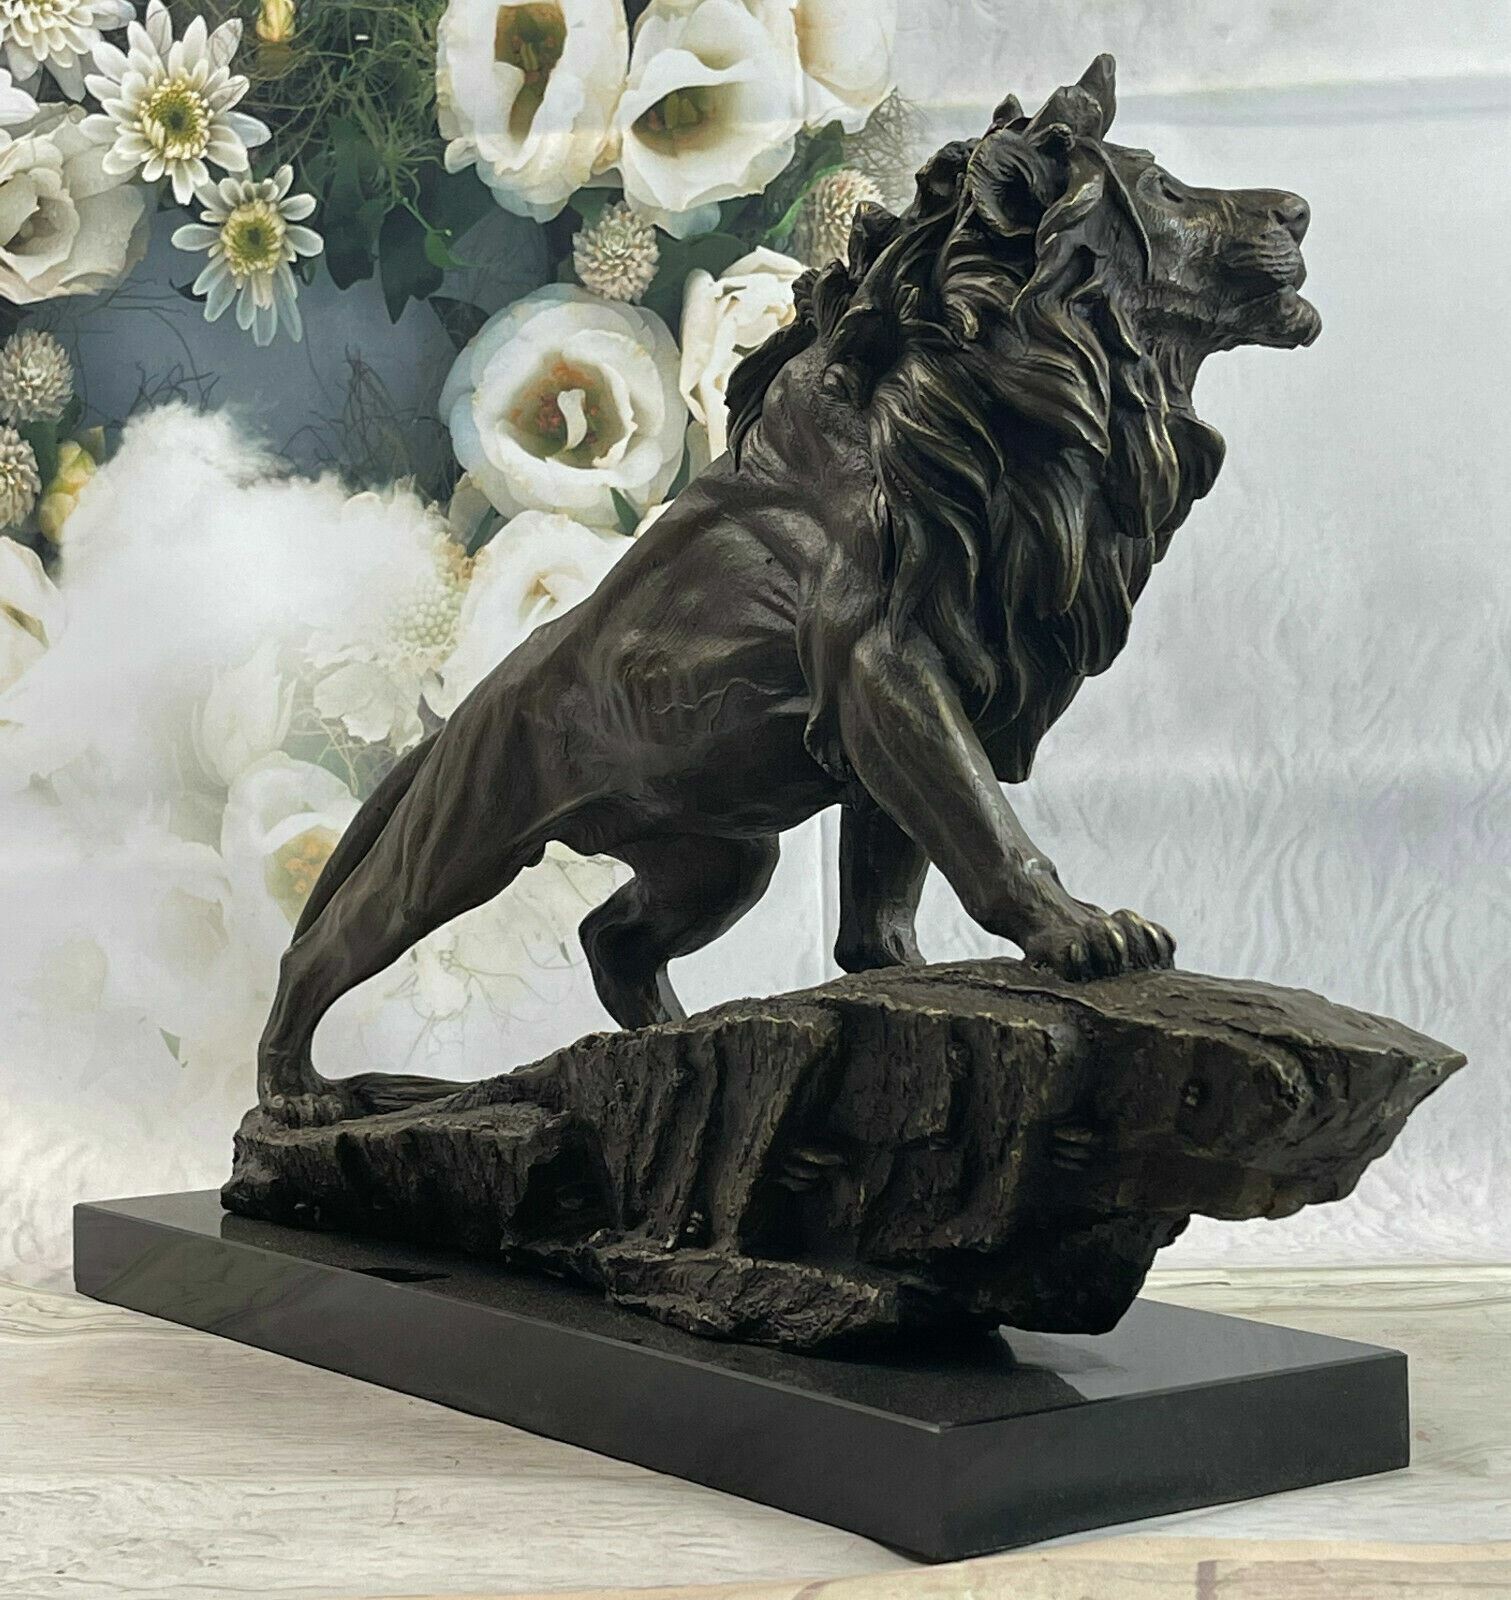 100% Solid Bronze sculpture a large animal male lion statue marble base Figurine